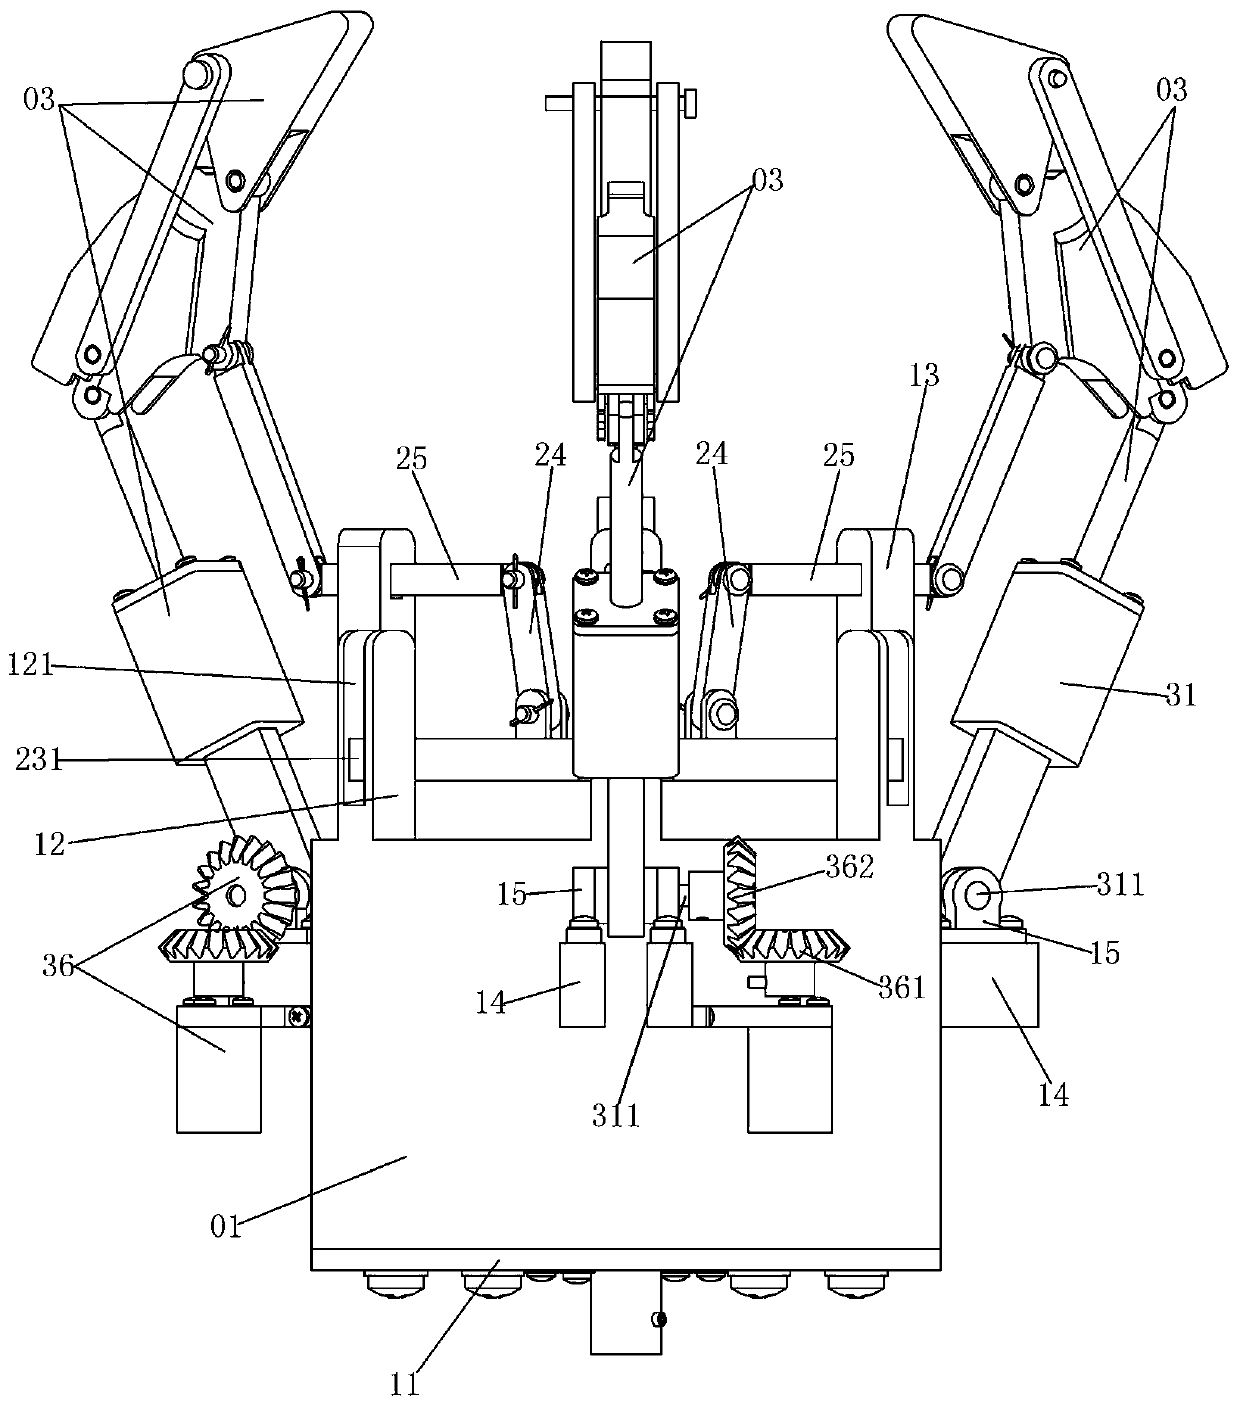 Underactuated finger combination mechanism for changing enveloping space by radially adjusting swing rod fulcrums